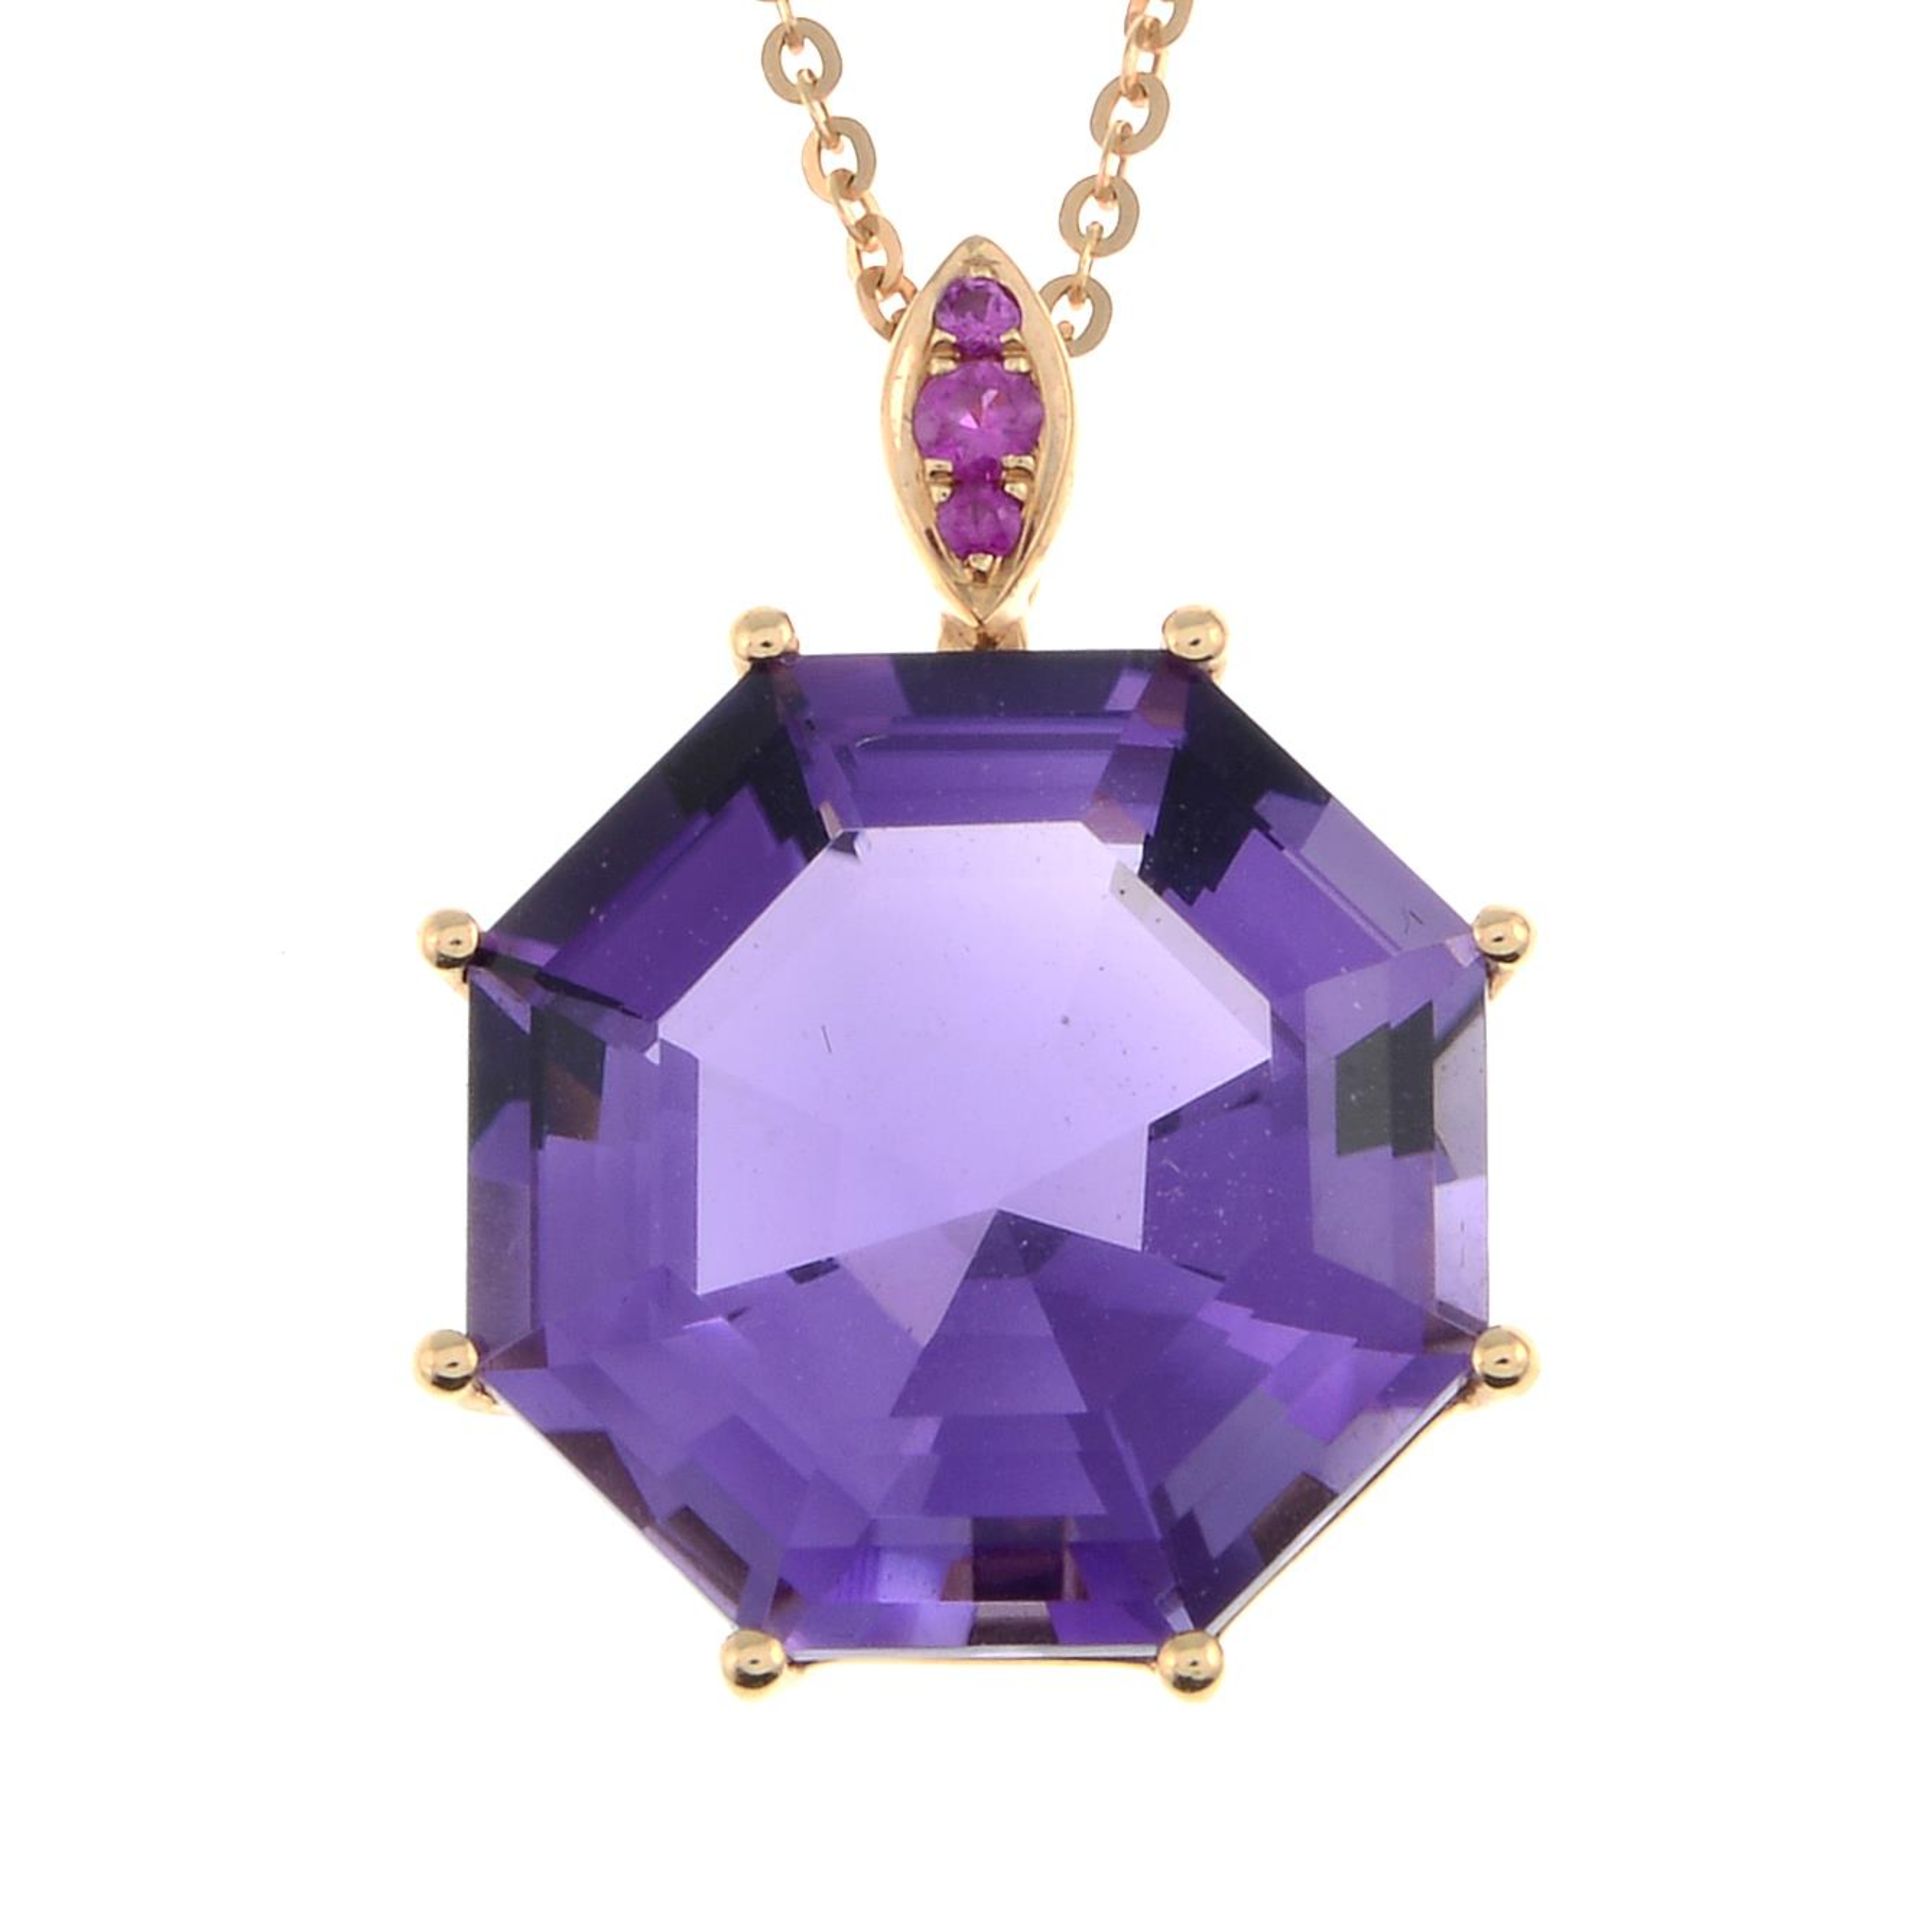 An 18ct gold amethyst and pink sapphire pendant, with 18ct gold chain.Hallmarks for 18ct gold.